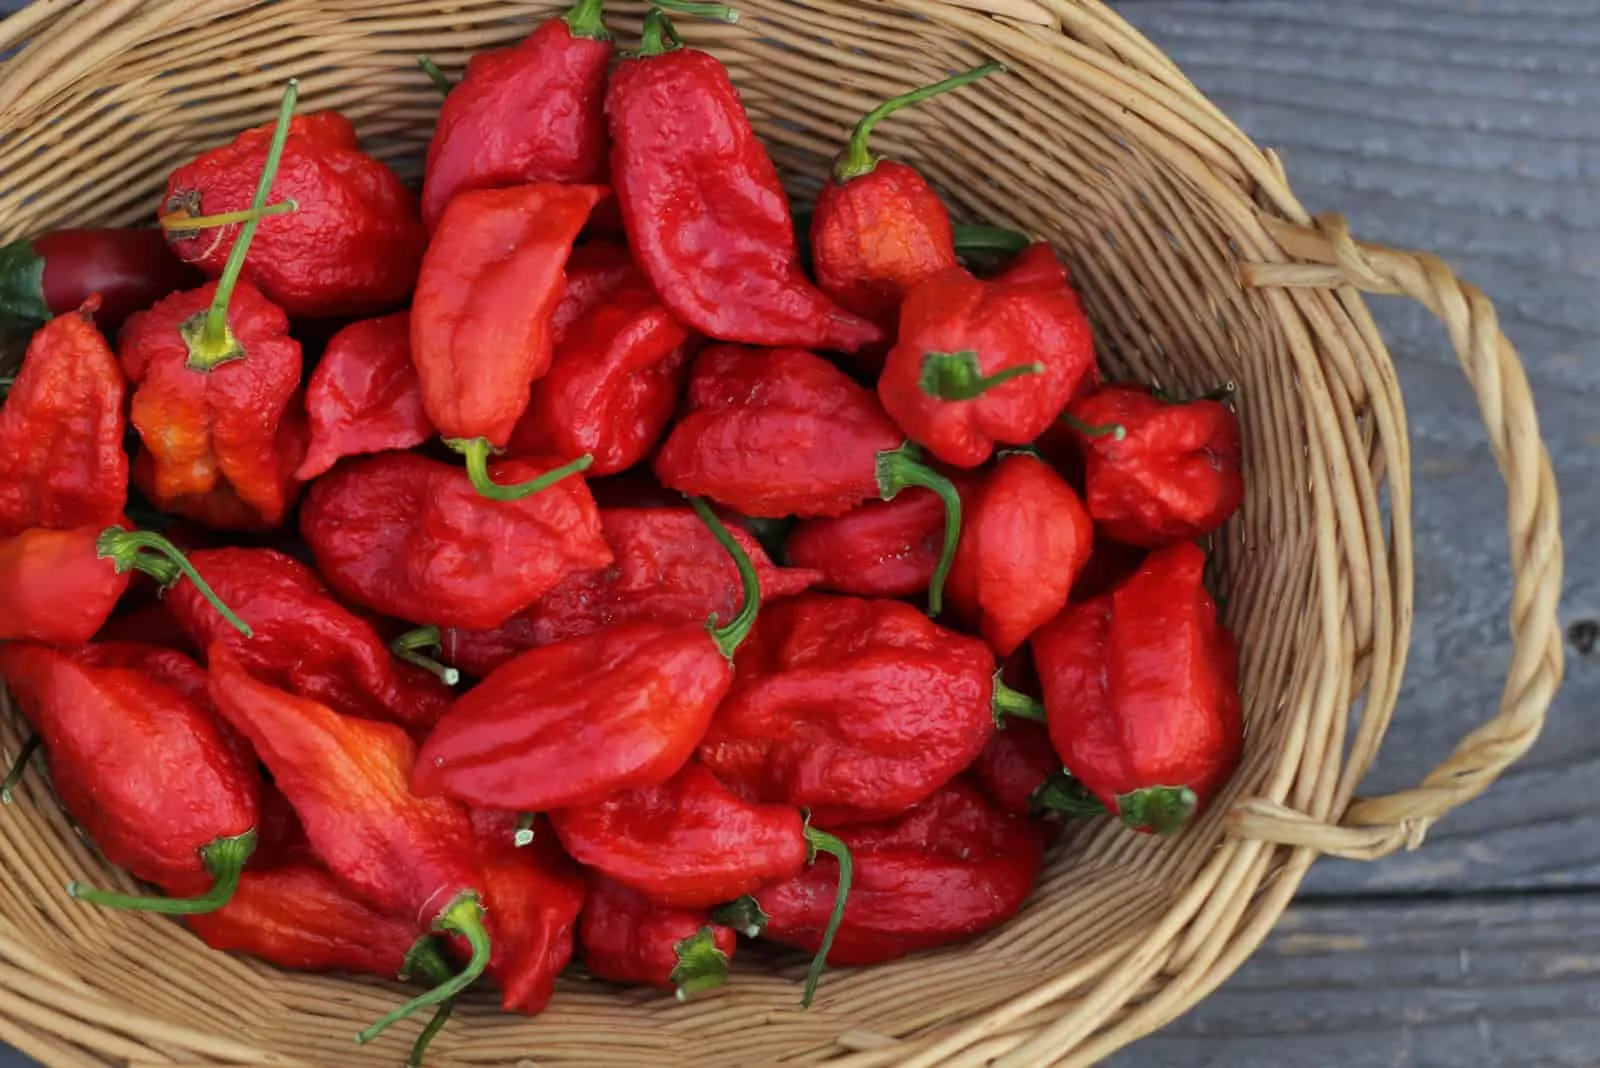 ghost peppers in a basket